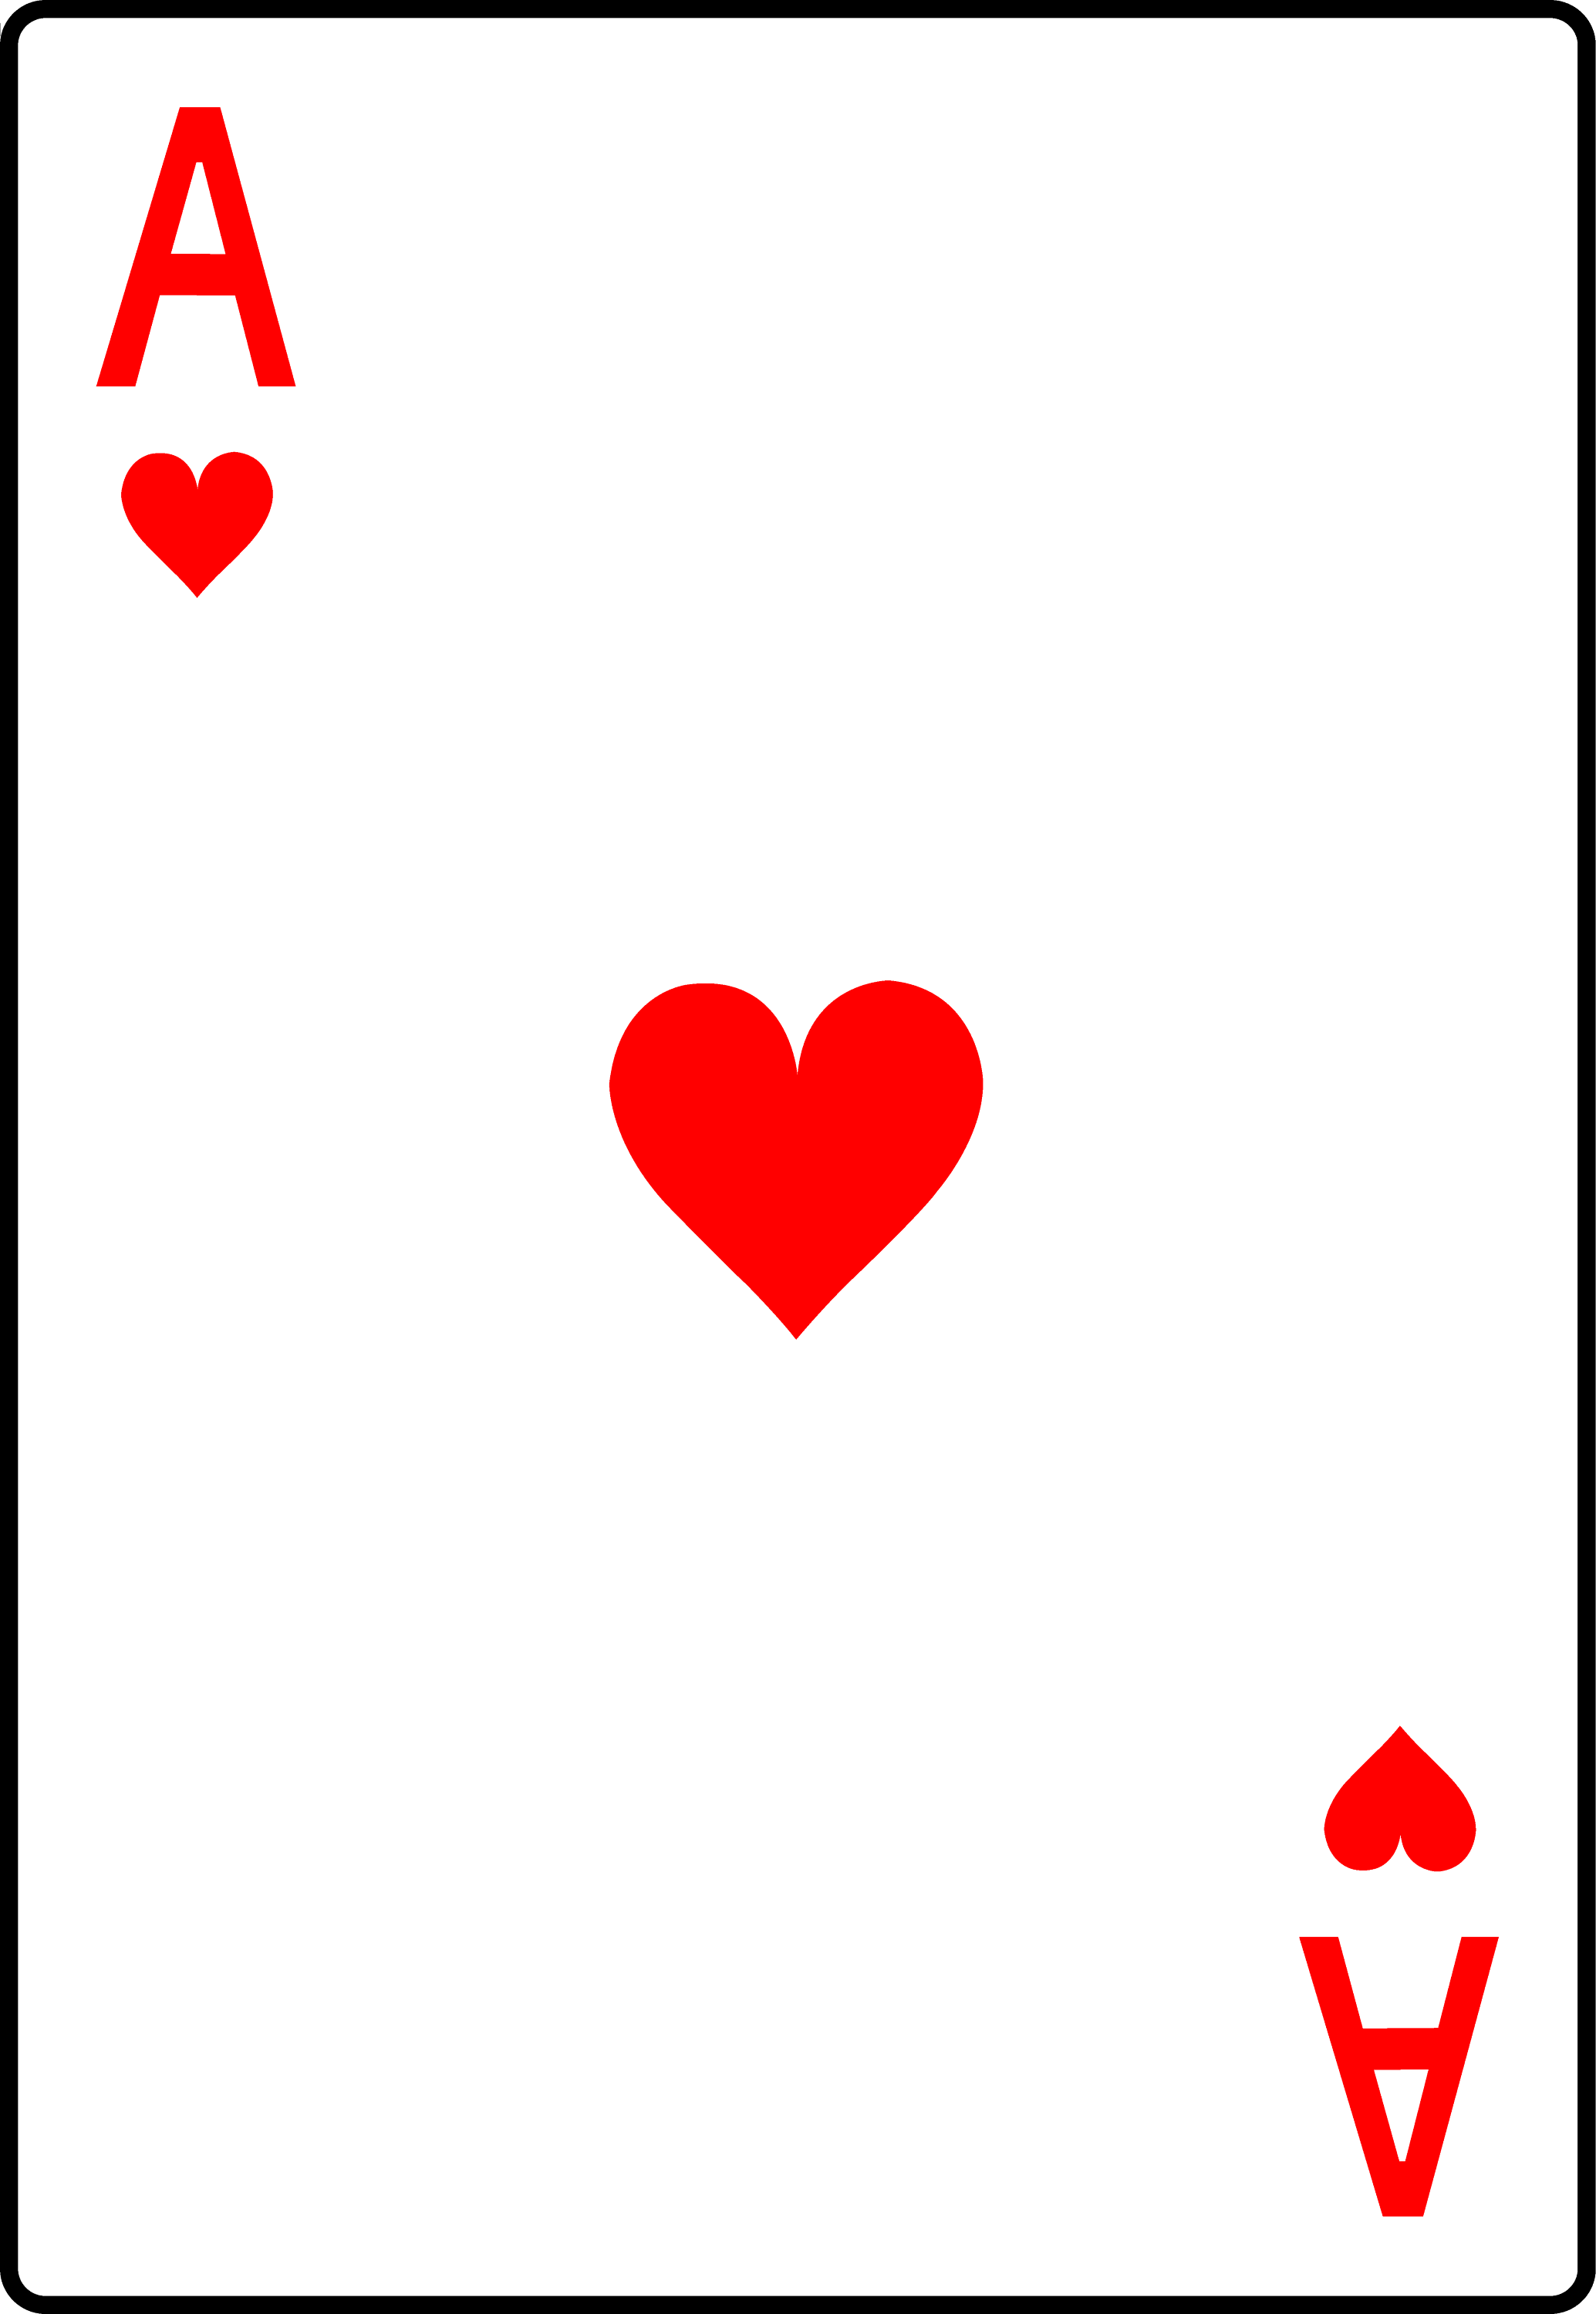 ace-of-hearts-playing-card-free-clip-art